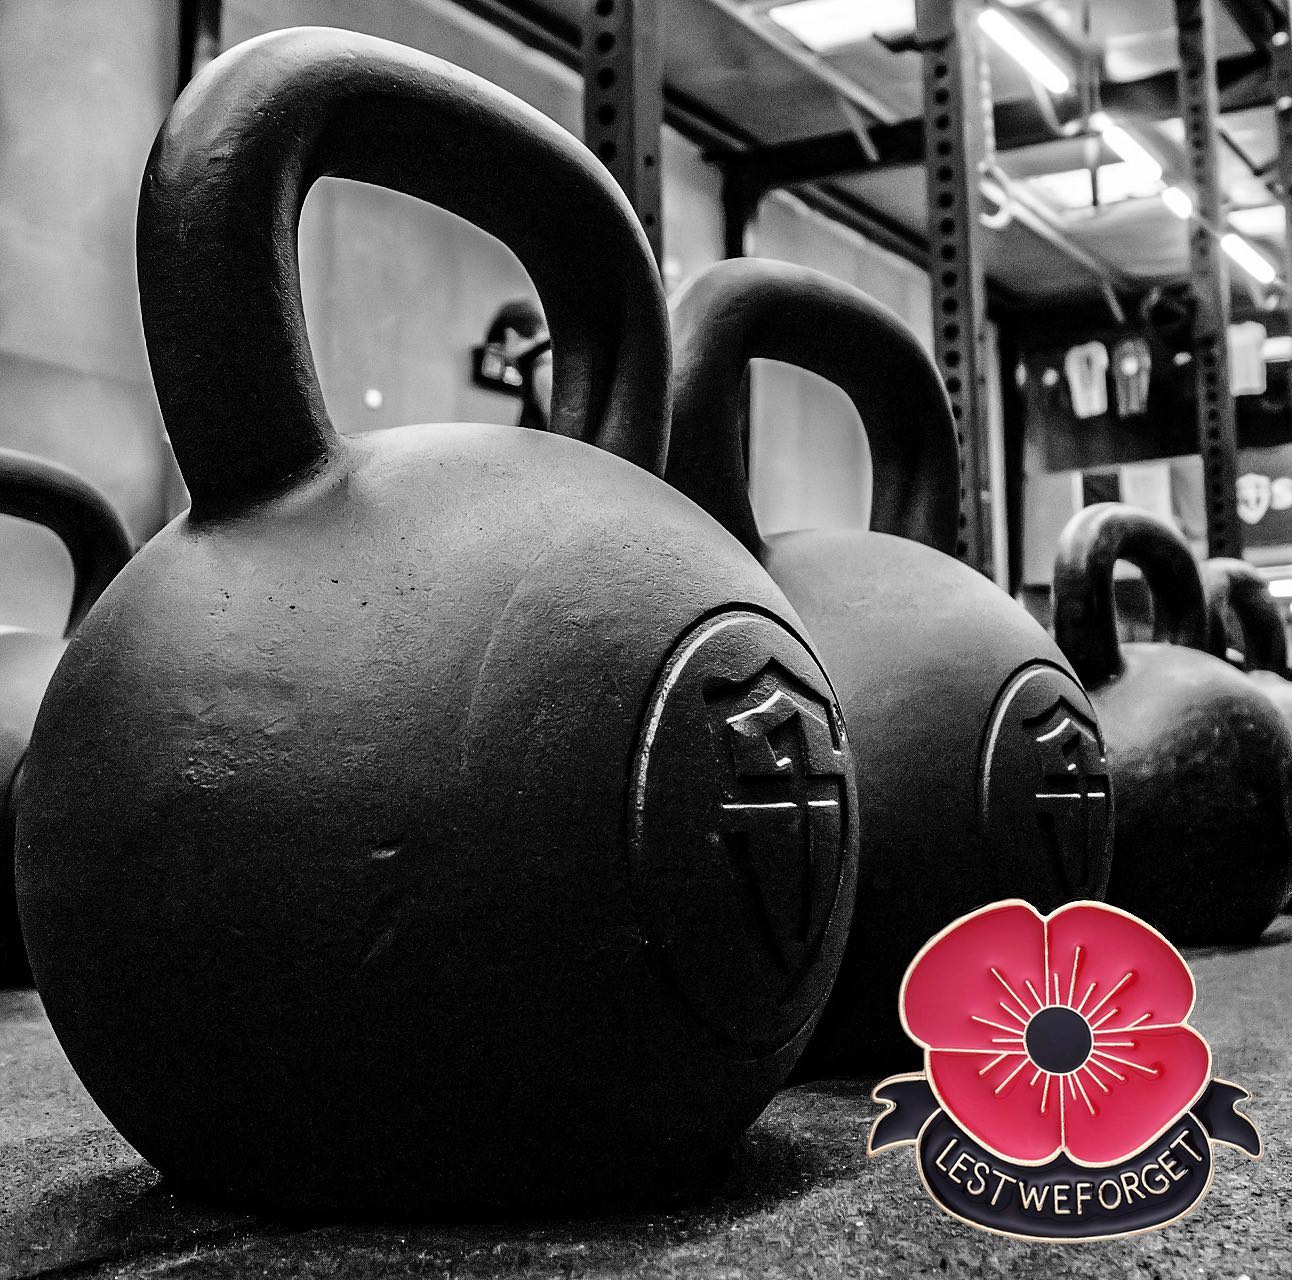 To all veterans past and present, we salute you! #strongfirst